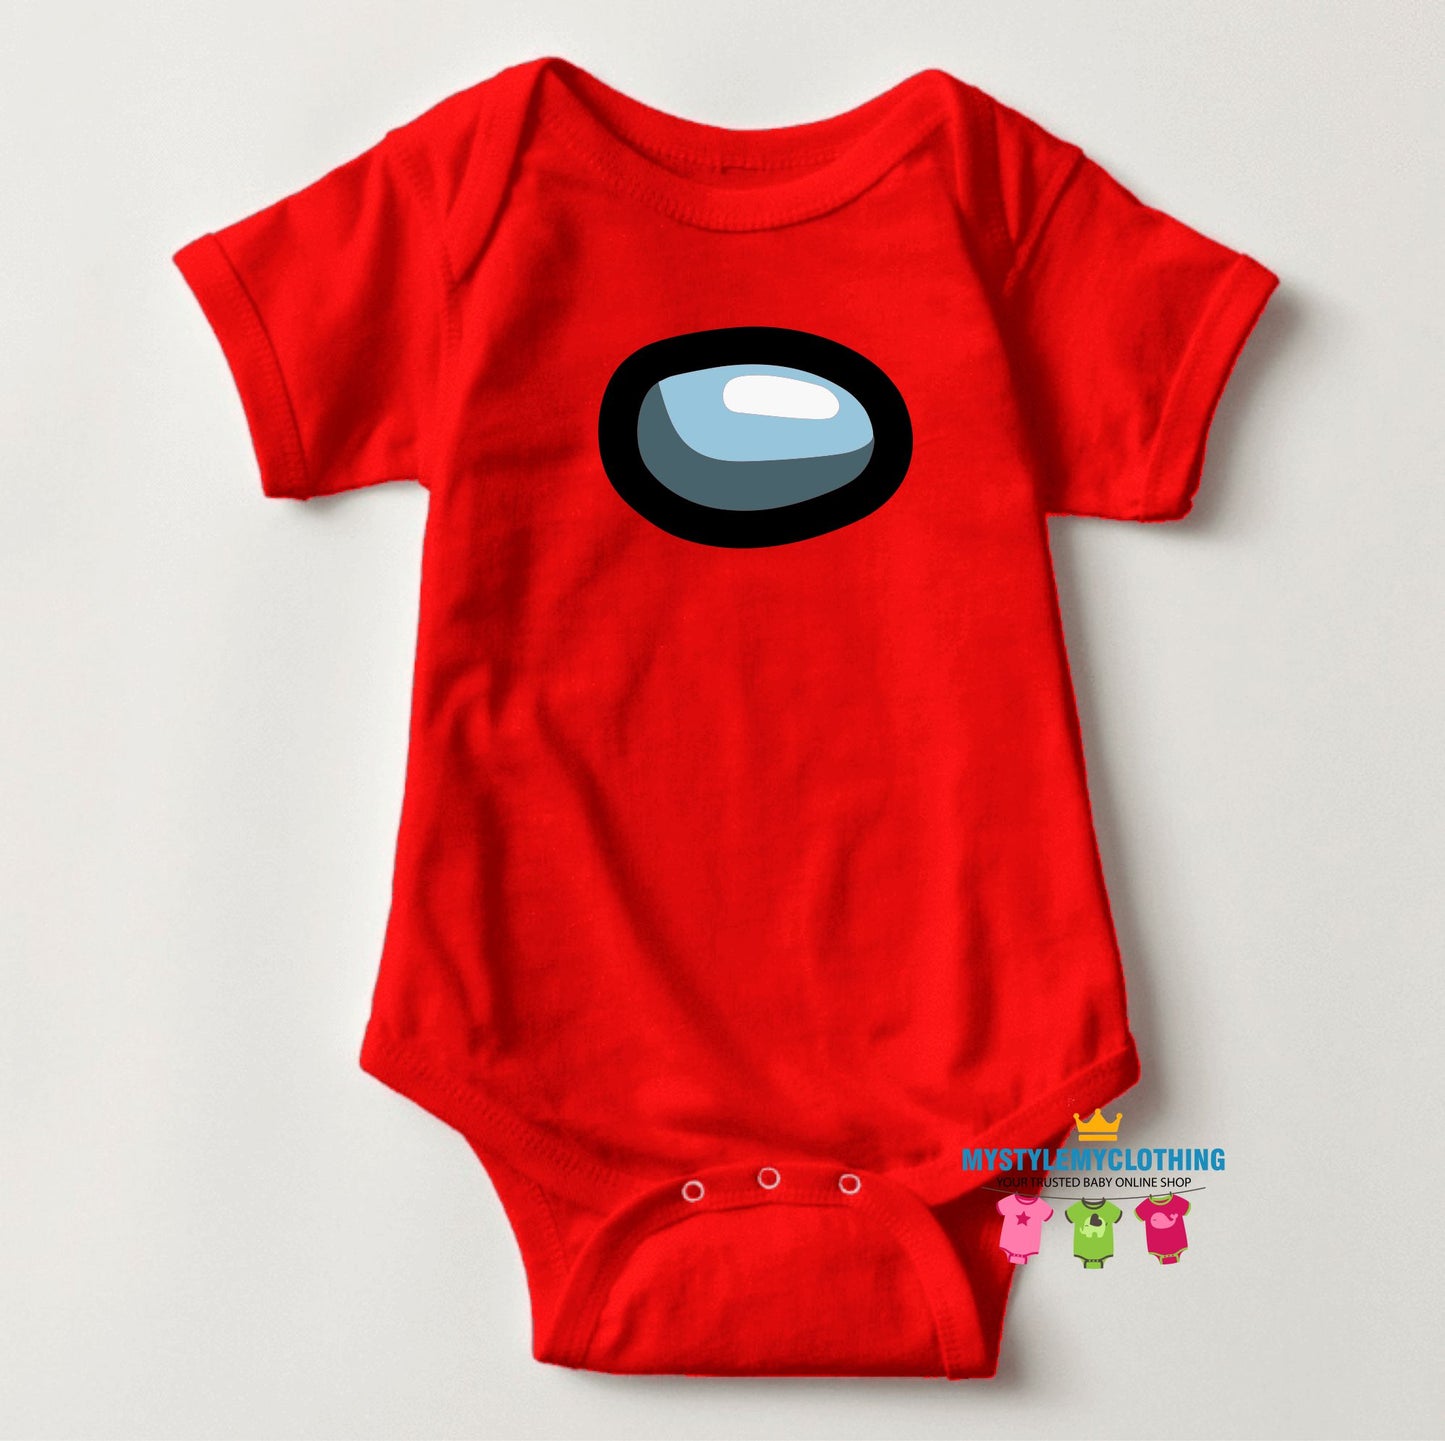 Baby Character Among Us Onesies -  Red - MYSTYLEMYCLOTHING